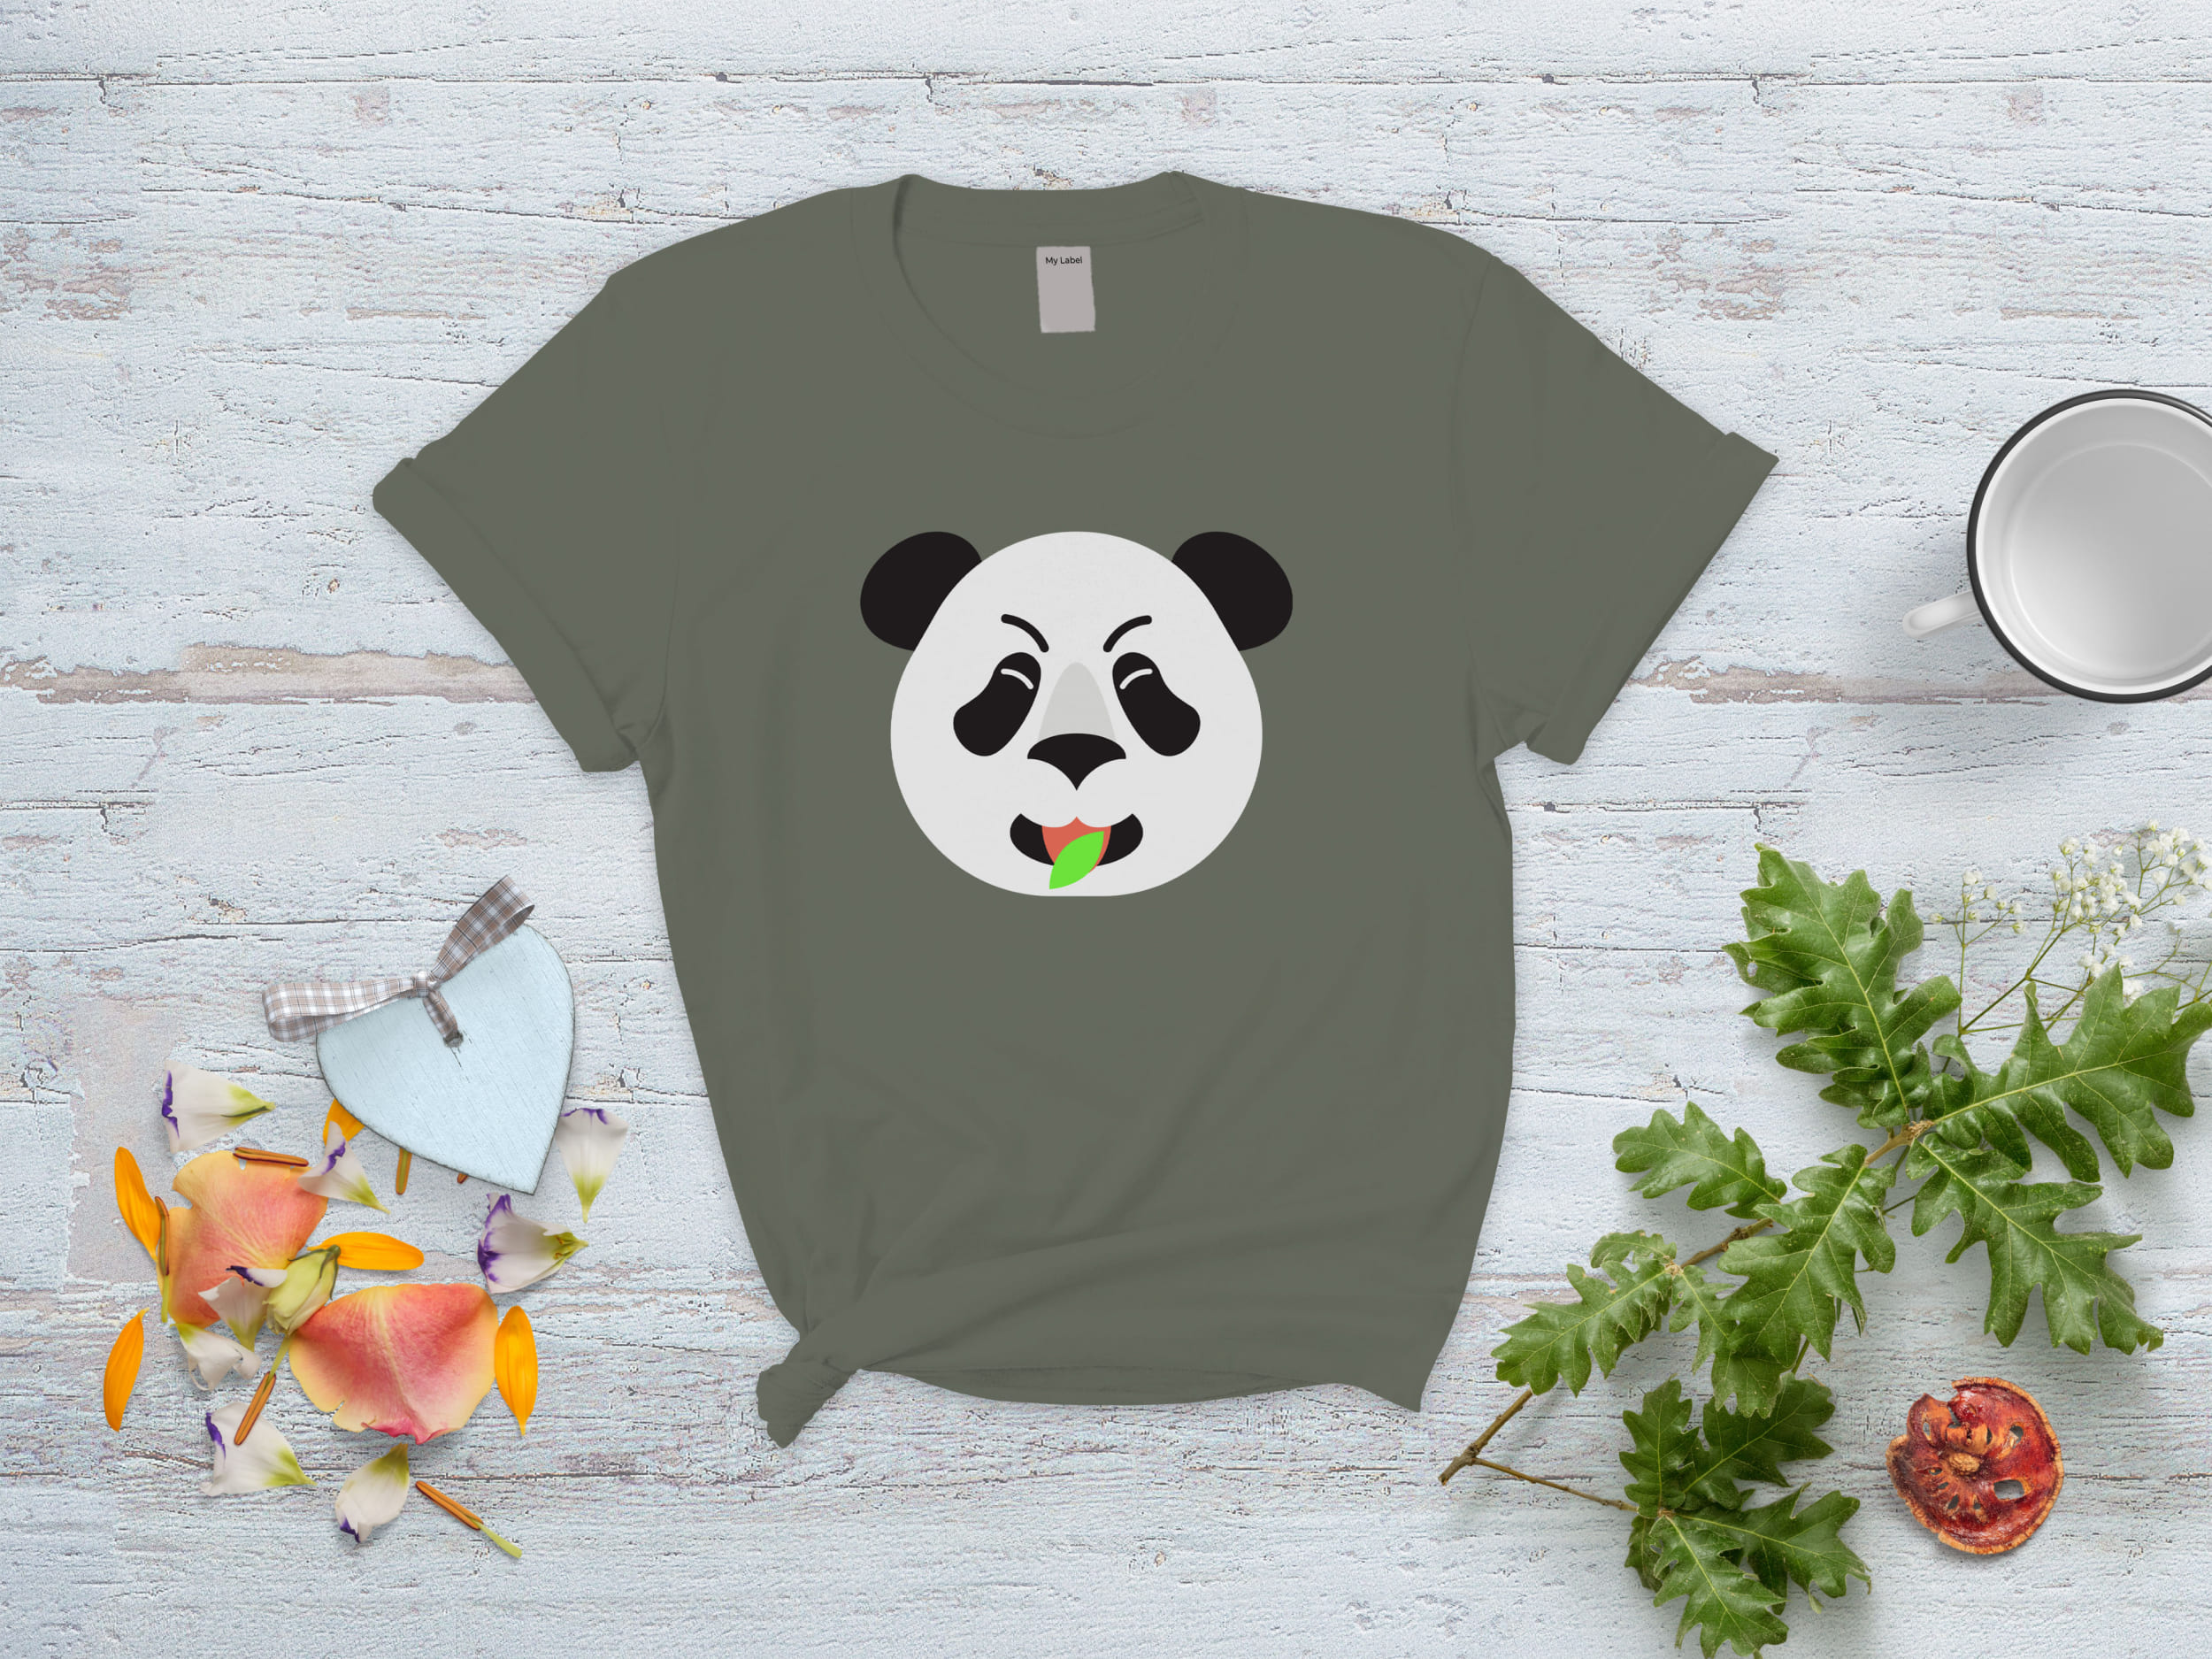 Gray t-shirt with a panda angry face on a gray and white background with various objects.